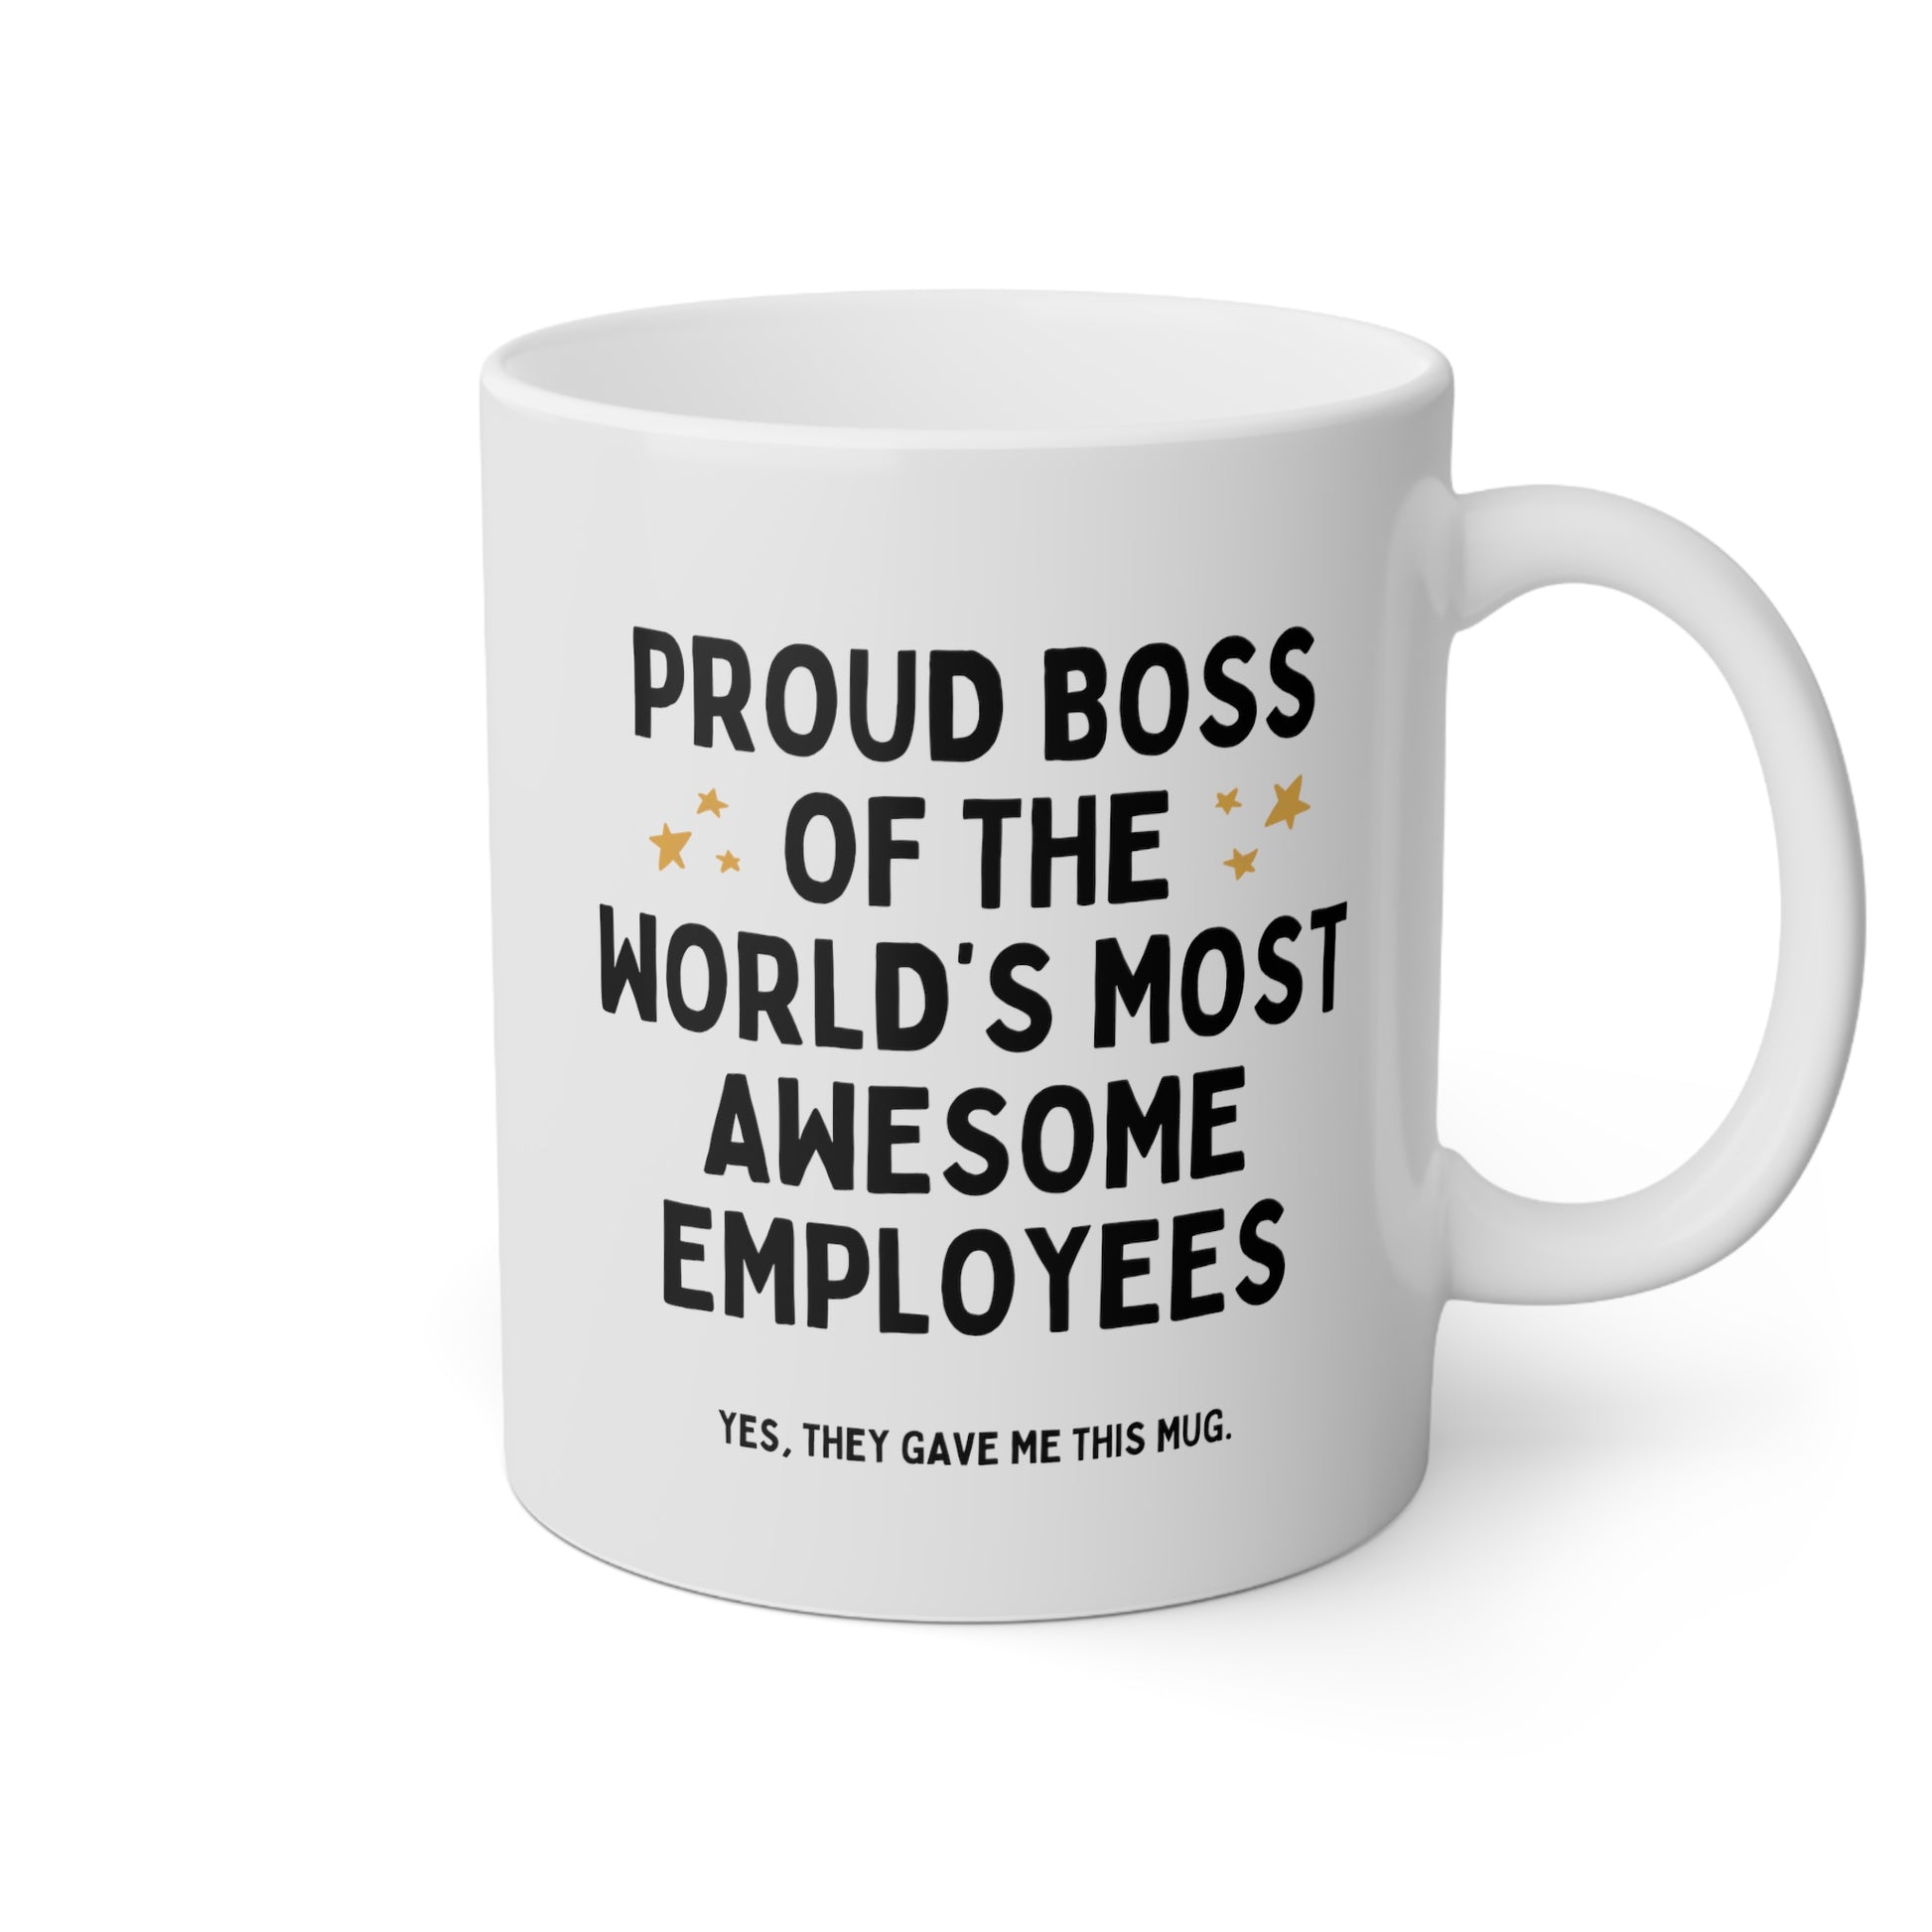 Proud Boss Of The World's Most Awesome Employees 11oz white funny large coffee mug gift for secret santa coworker supervisor appreciation waveywares wavey wares wavywares wavy wares